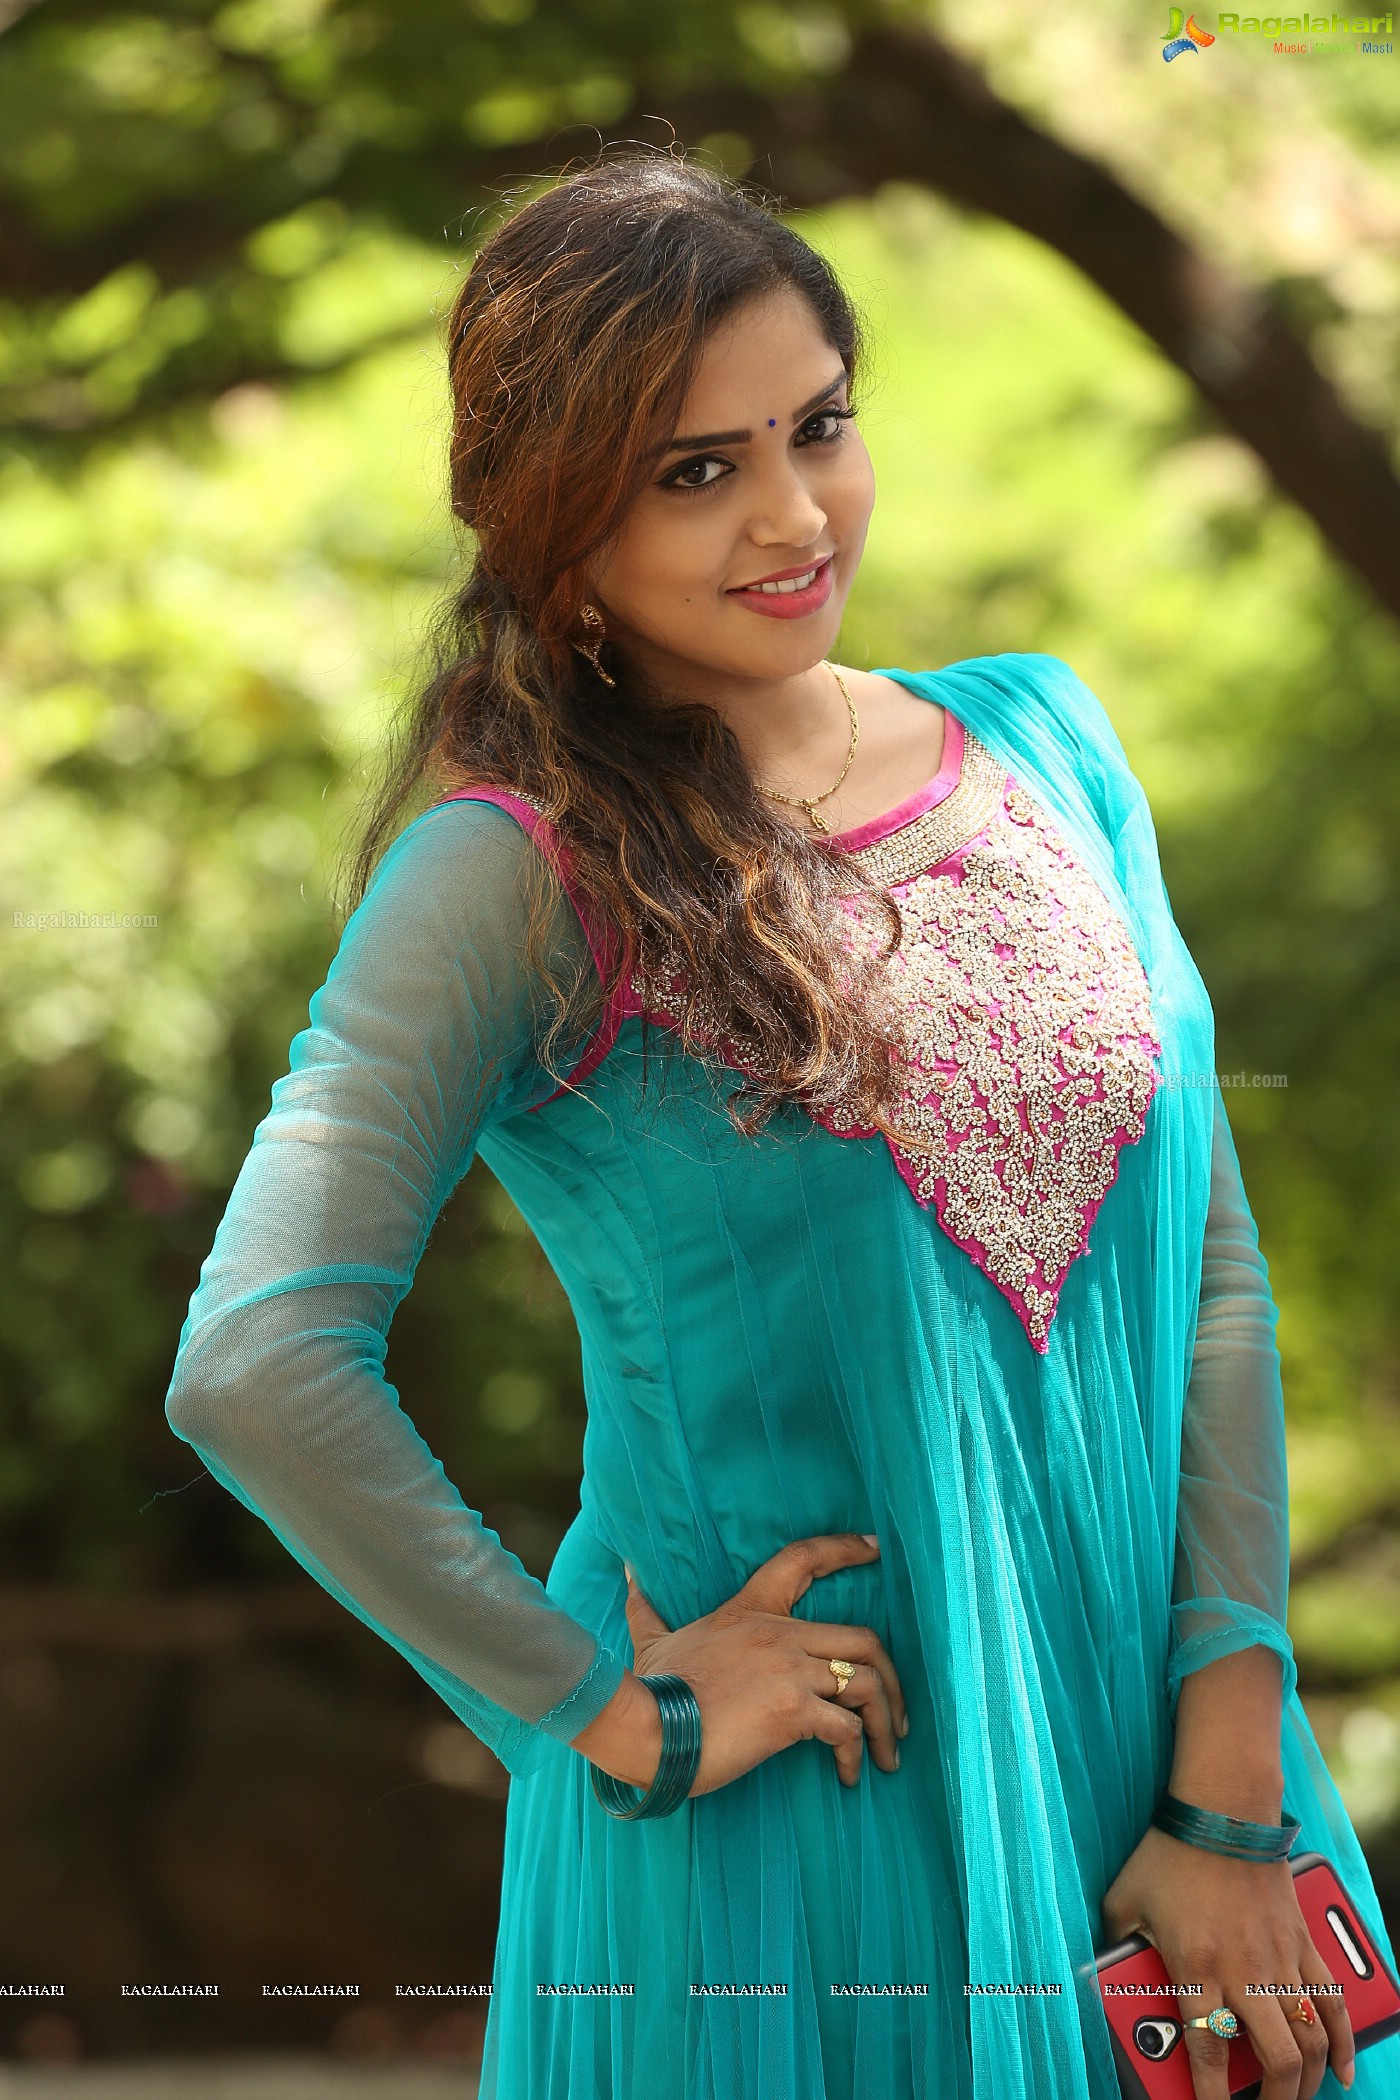 Karunya Chowdary (Posters)